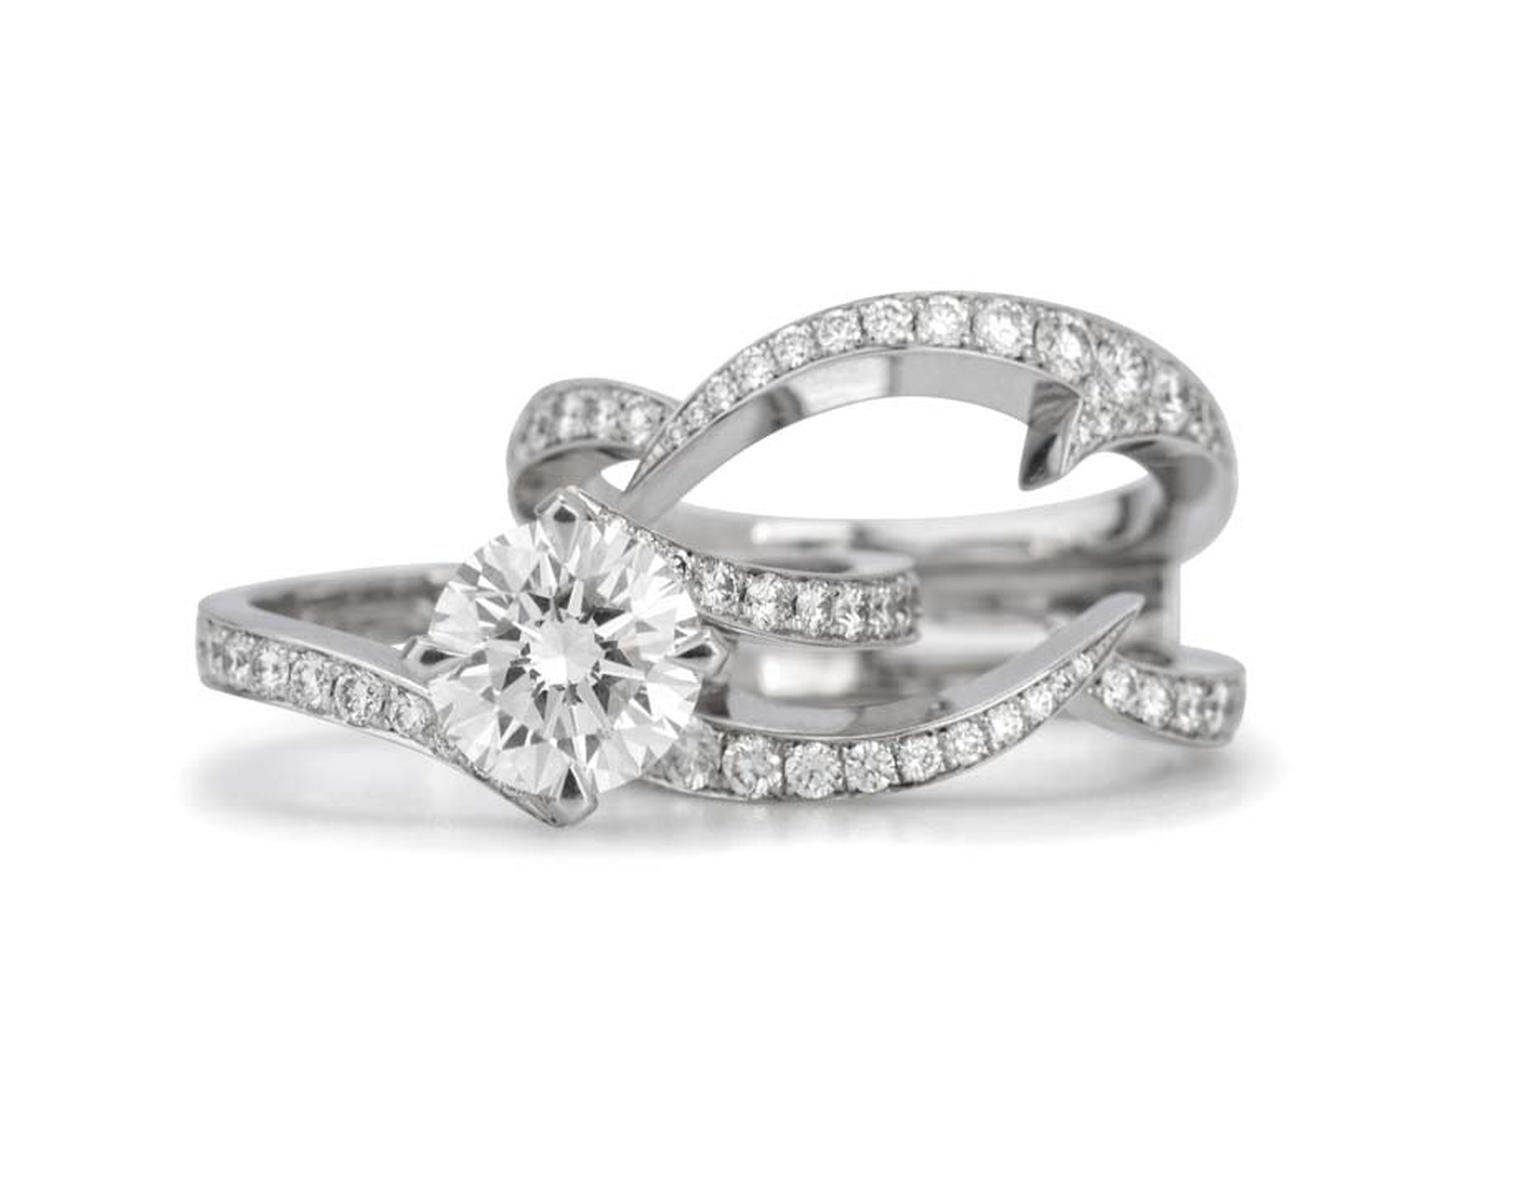 Stephen Webster's Bridal Collection 'Thorn' interlocking engagement ring and wedding diamond band with Forevermark diamonds.